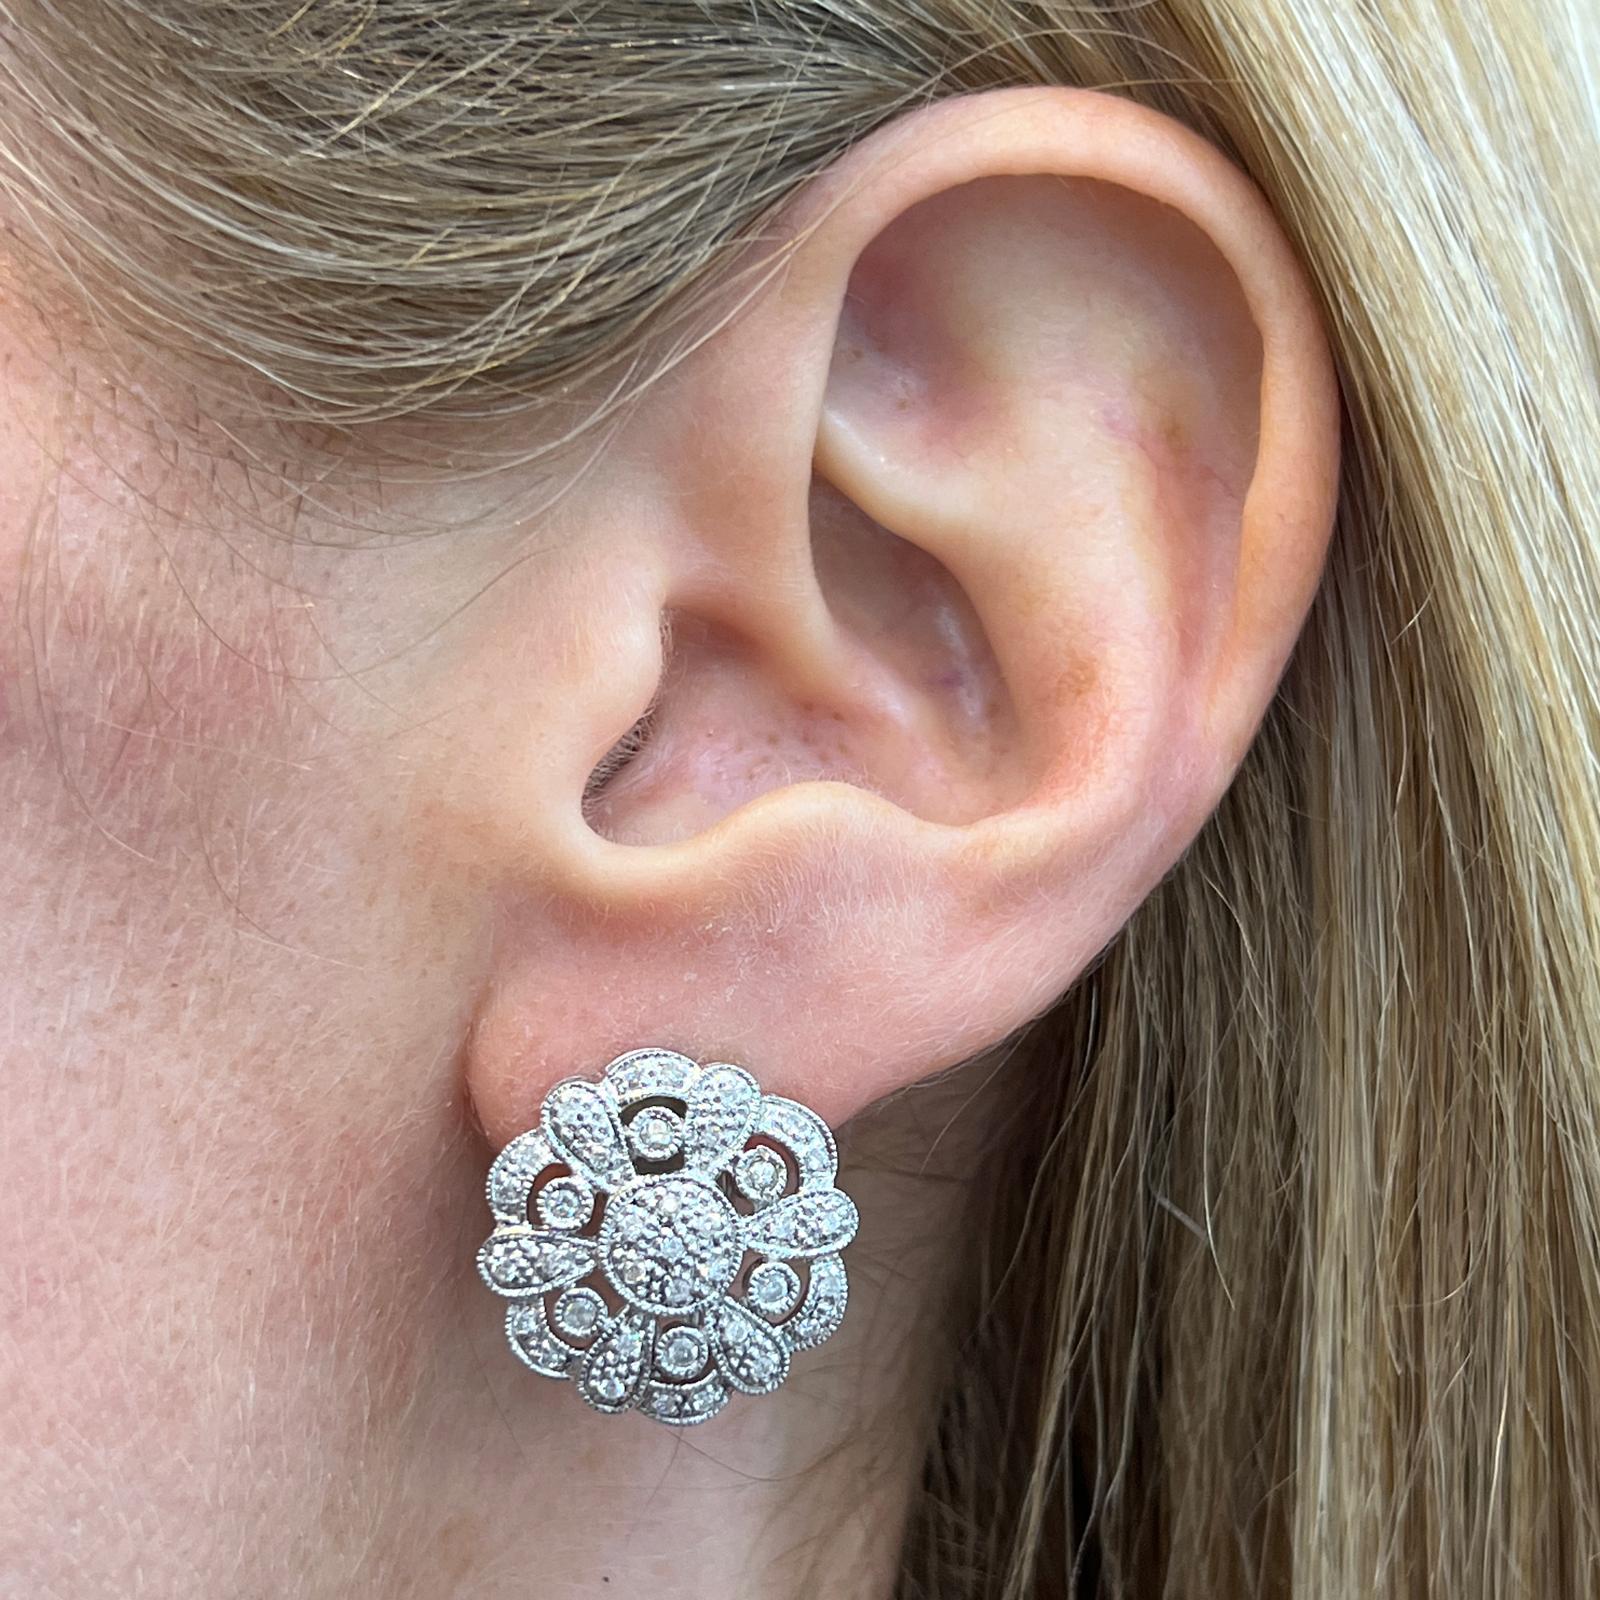 Circular diamond earrings fashioned in 14 karat white gold. The earrings feature 72 round brilliant cut diamonds weighing approximately 1.00 CTW and graded H-I color and SI clarity. The earrings measure .75 x .75 inches, and are light enough for